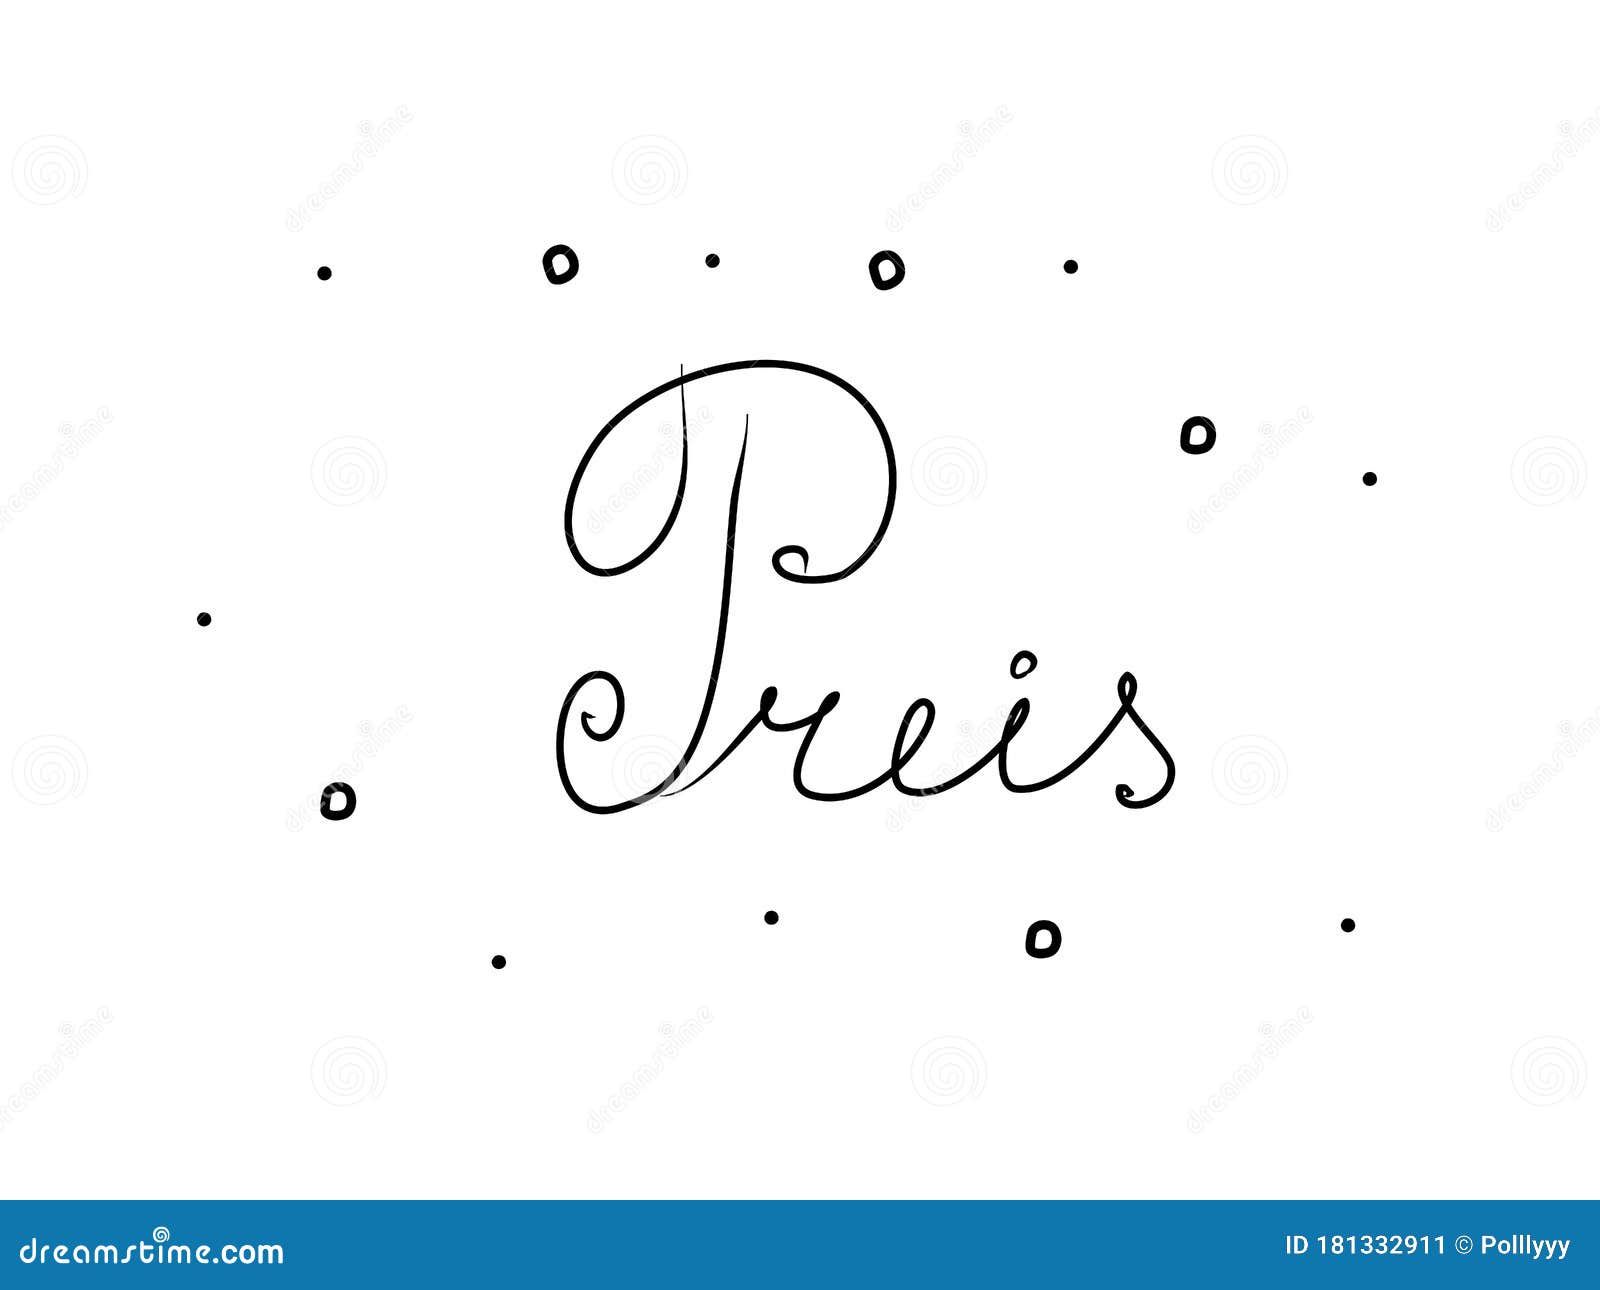 preis phrase handwritten with a calligraphy brush. prize in german. modern brush calligraphy.  word black